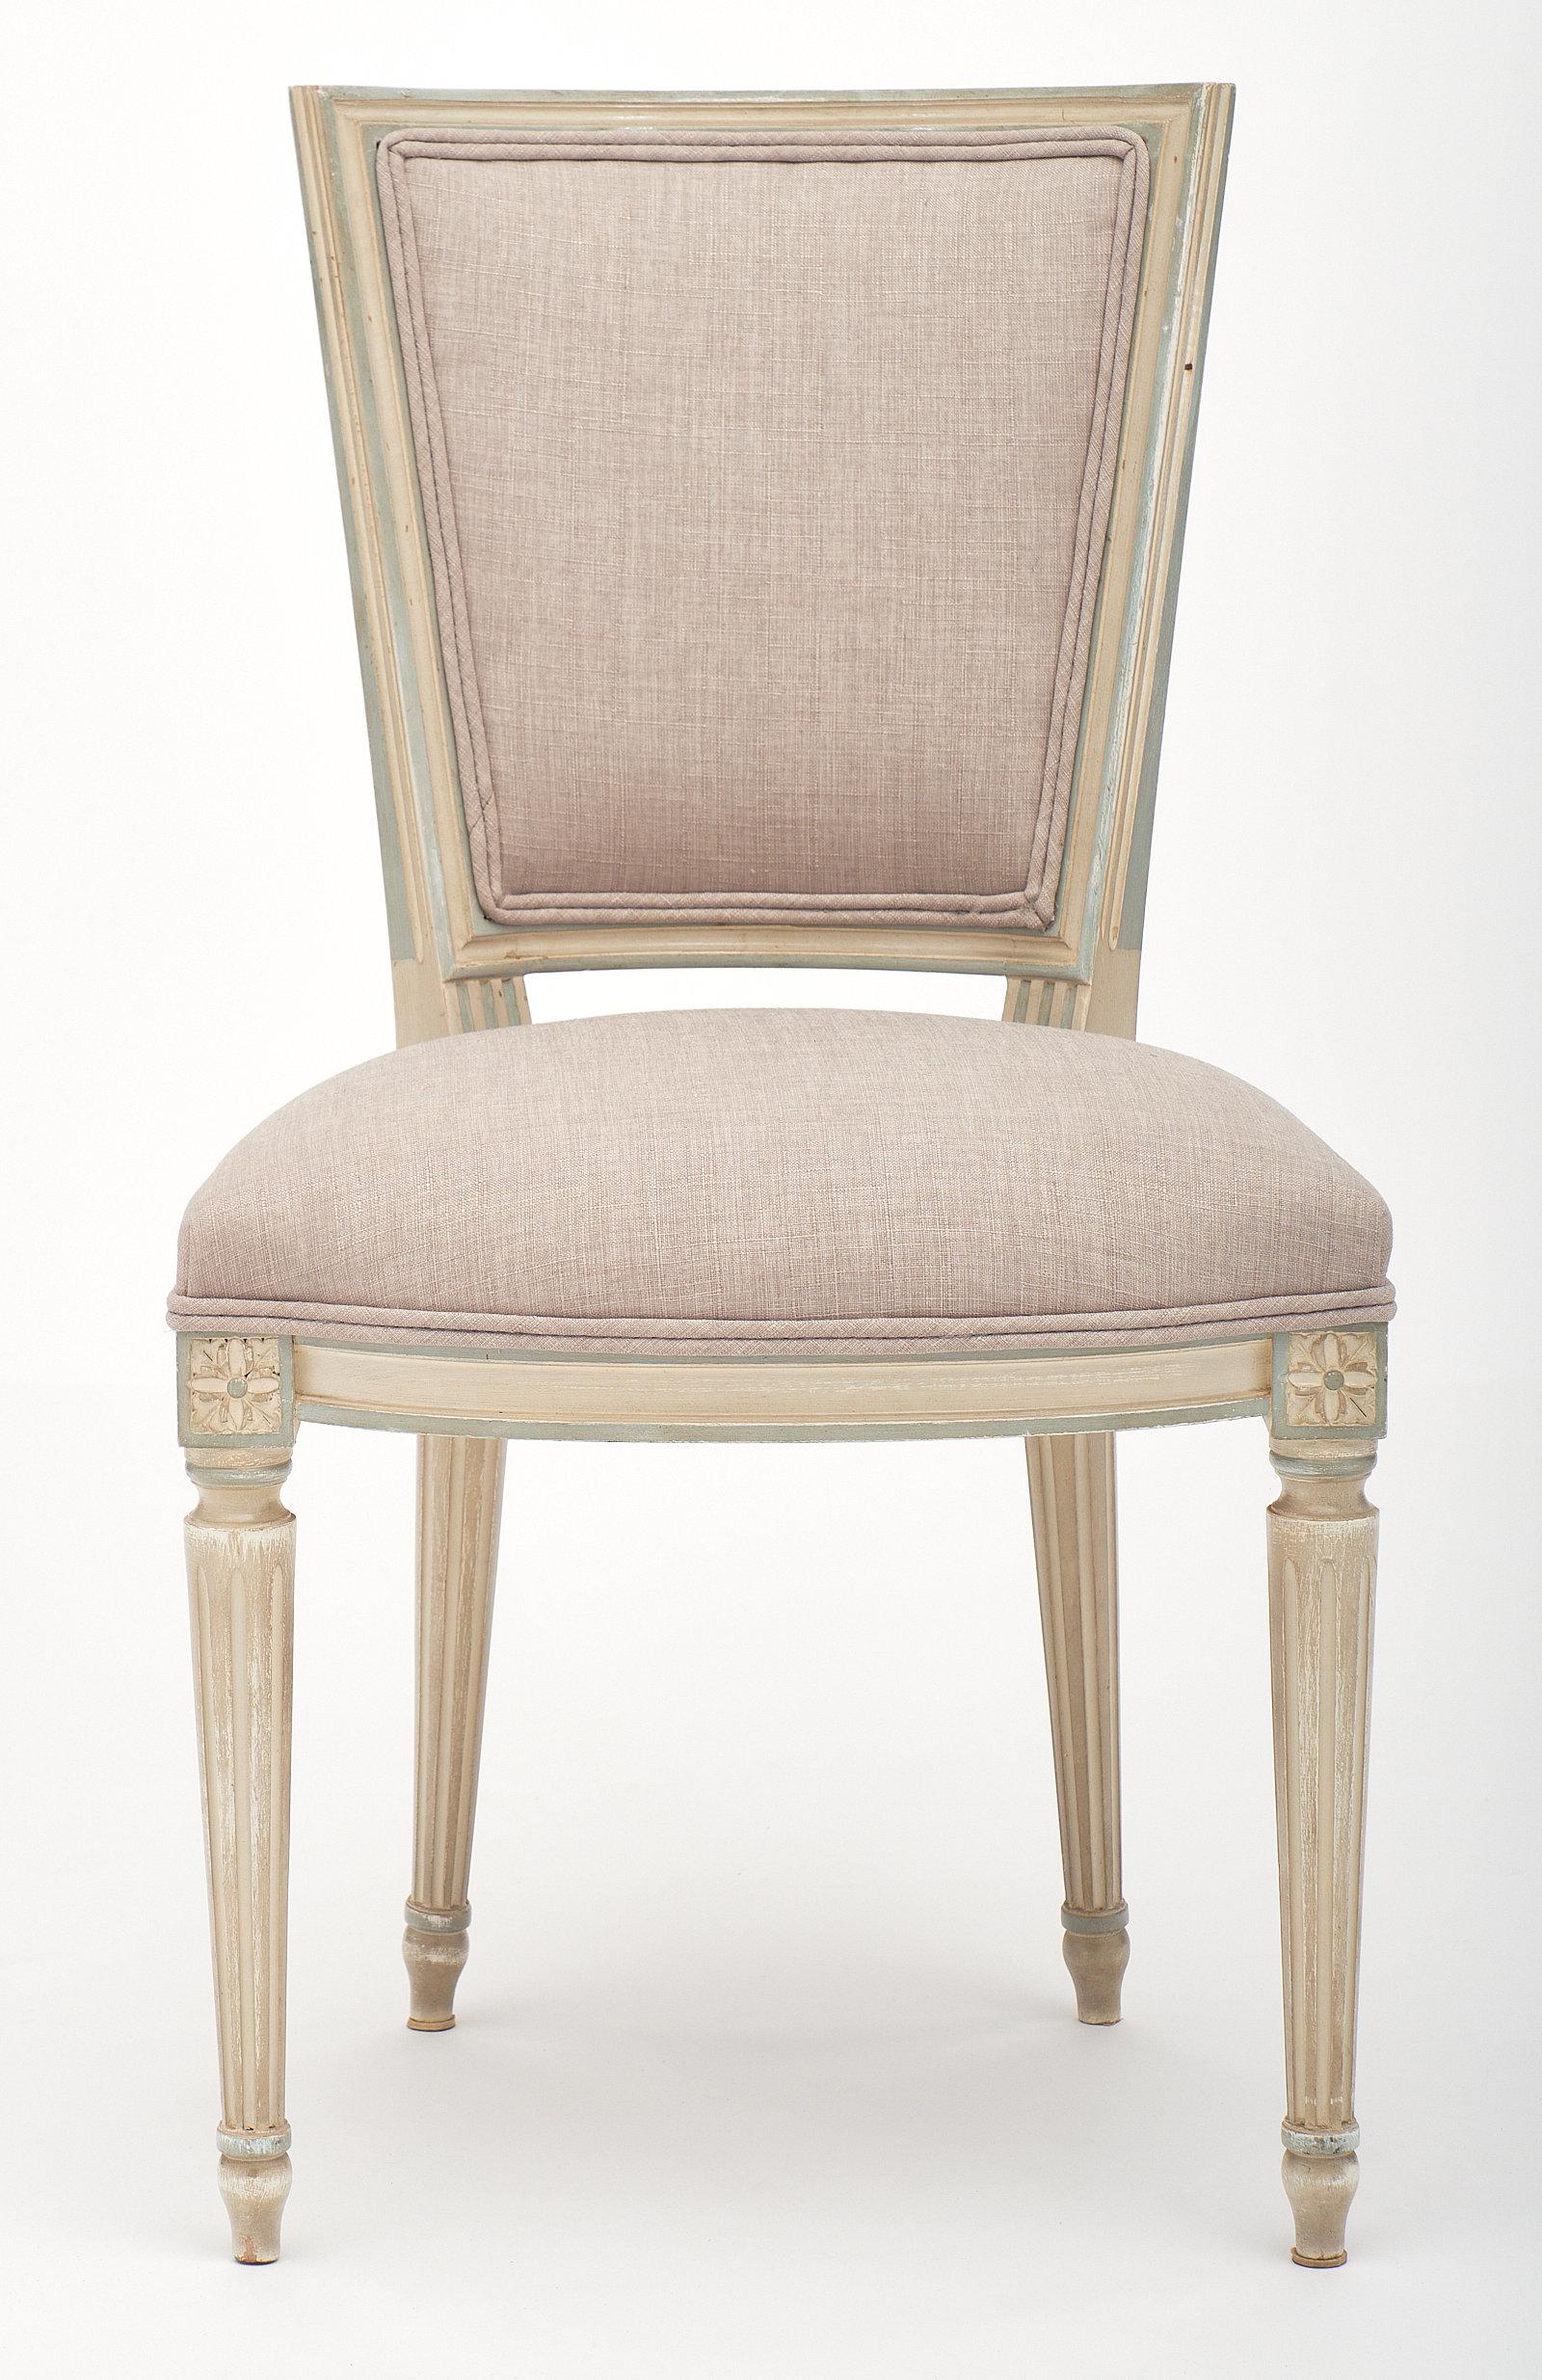 Late 19th Century Louis XVI Style Set of Chairs with Armchairs